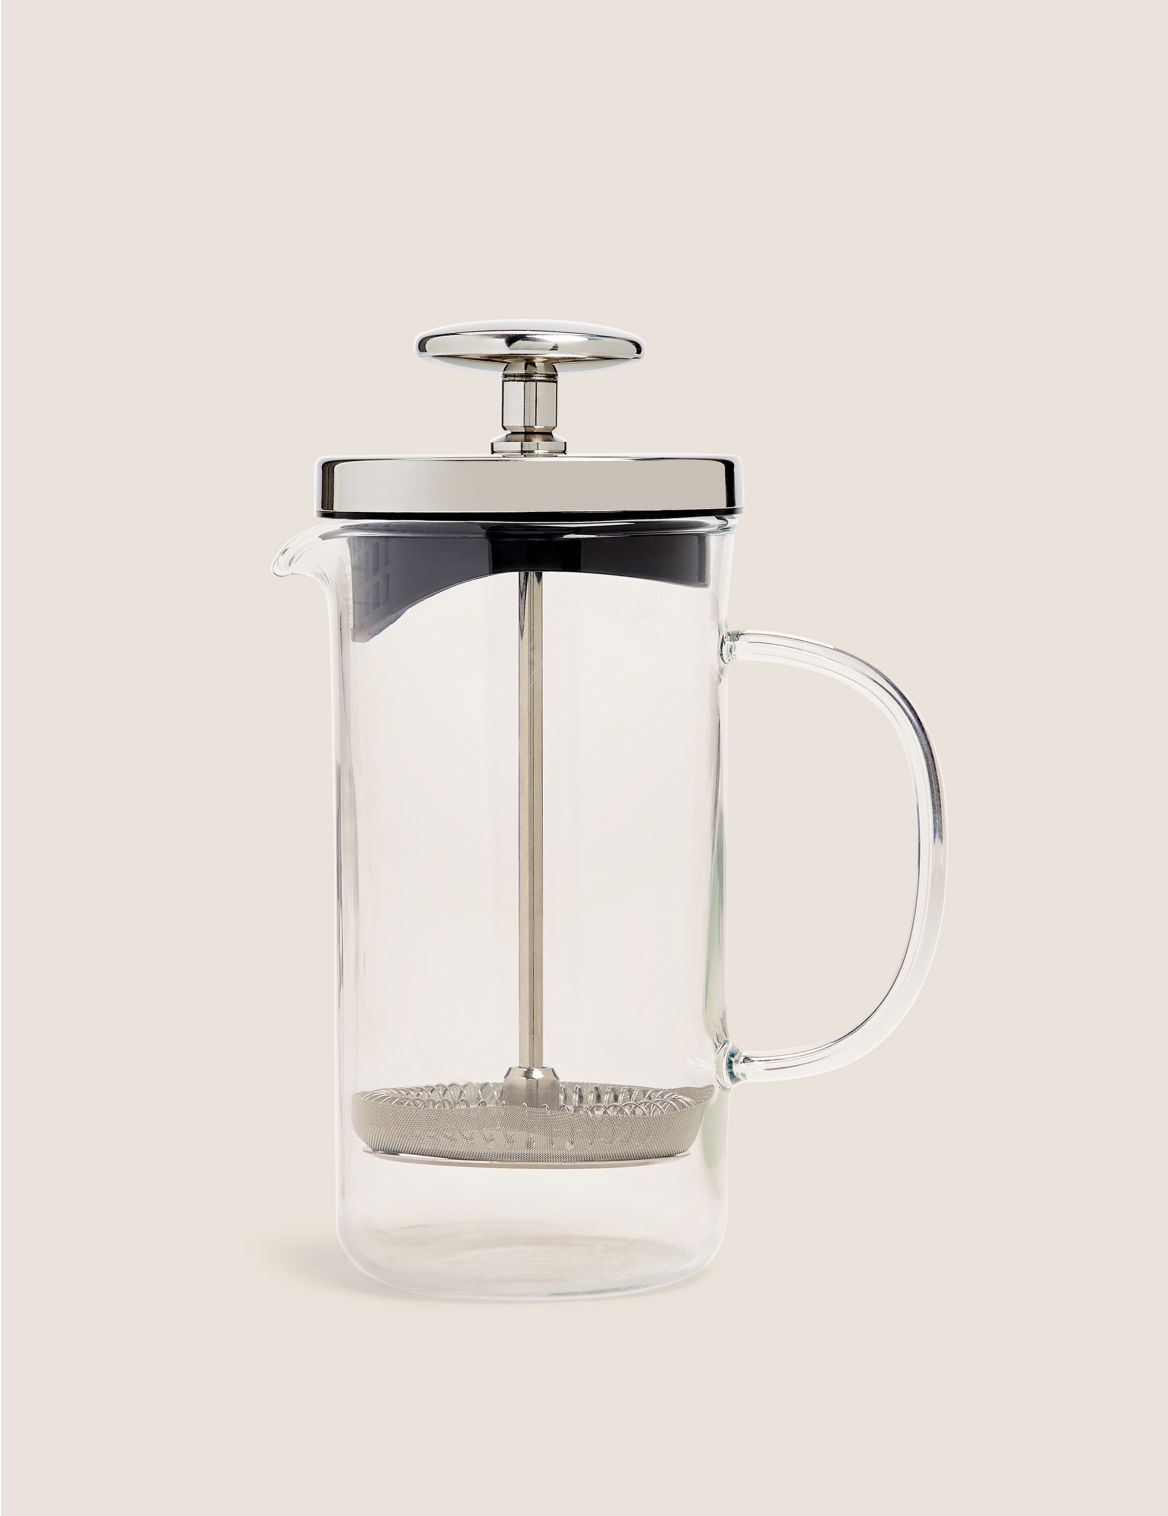 Image of Portland 3 Cup Cafetiere silver